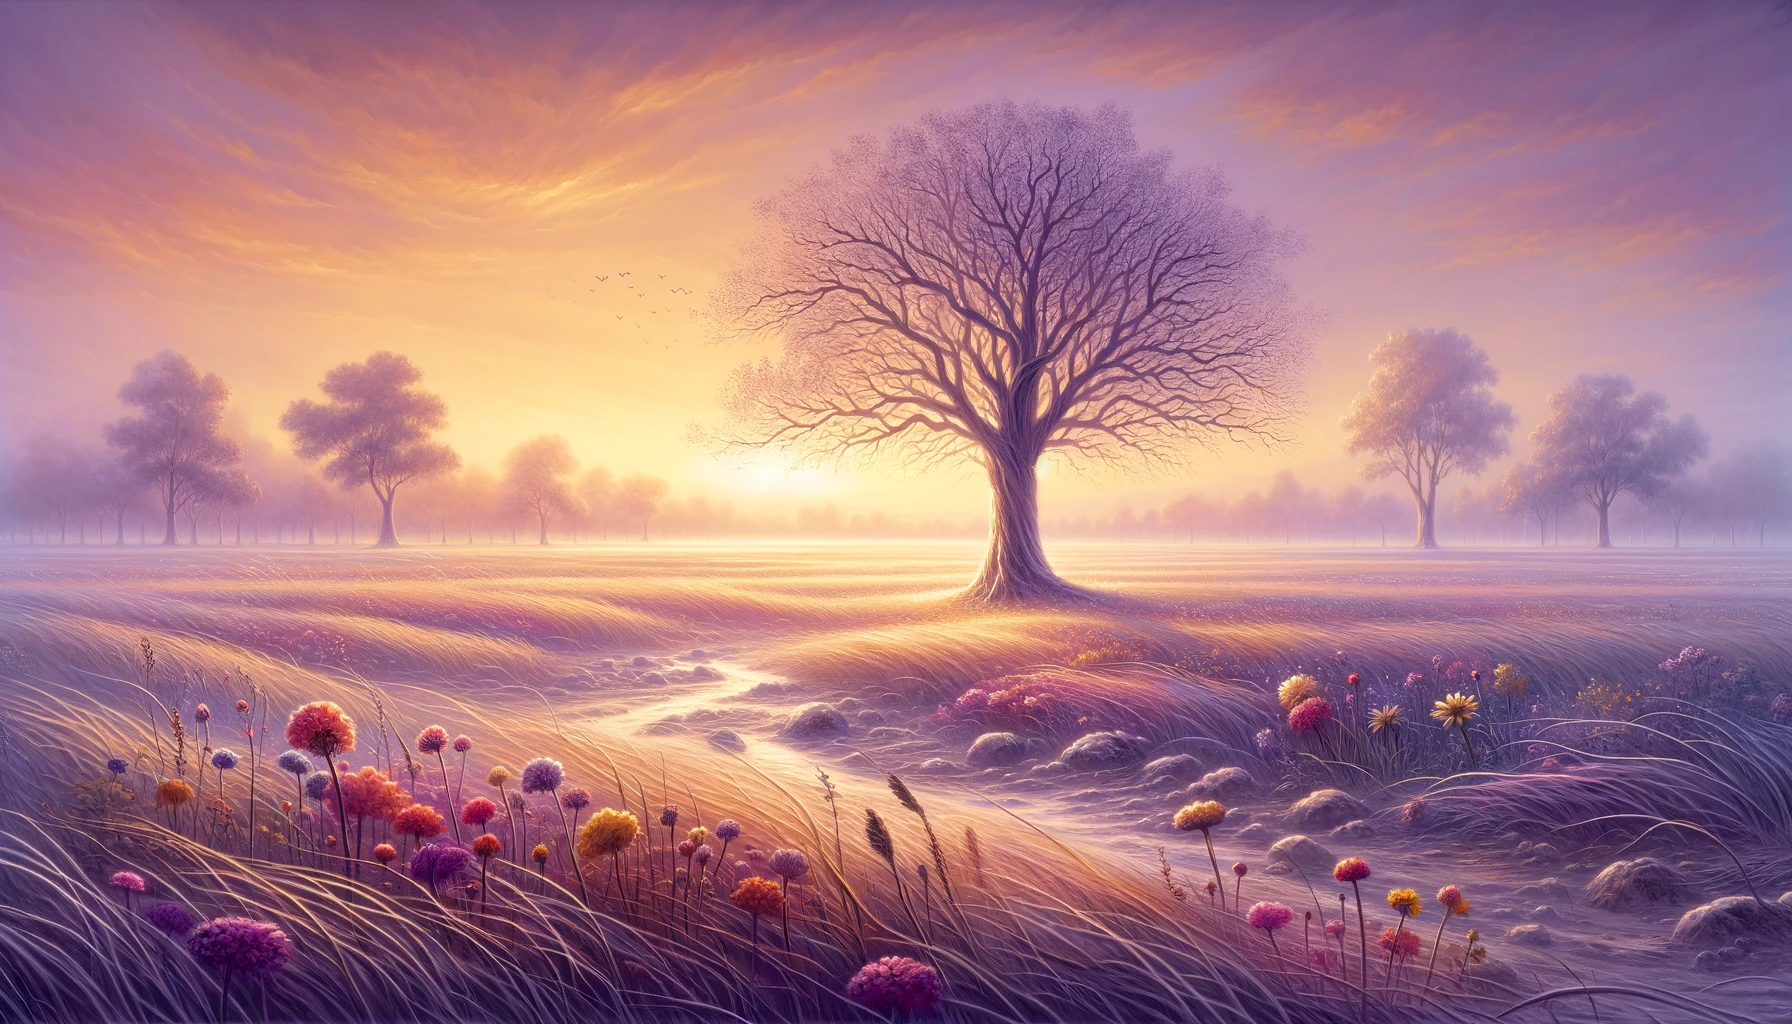 Artistic depiction of a serene landscape with a lone tree and colorful flowers